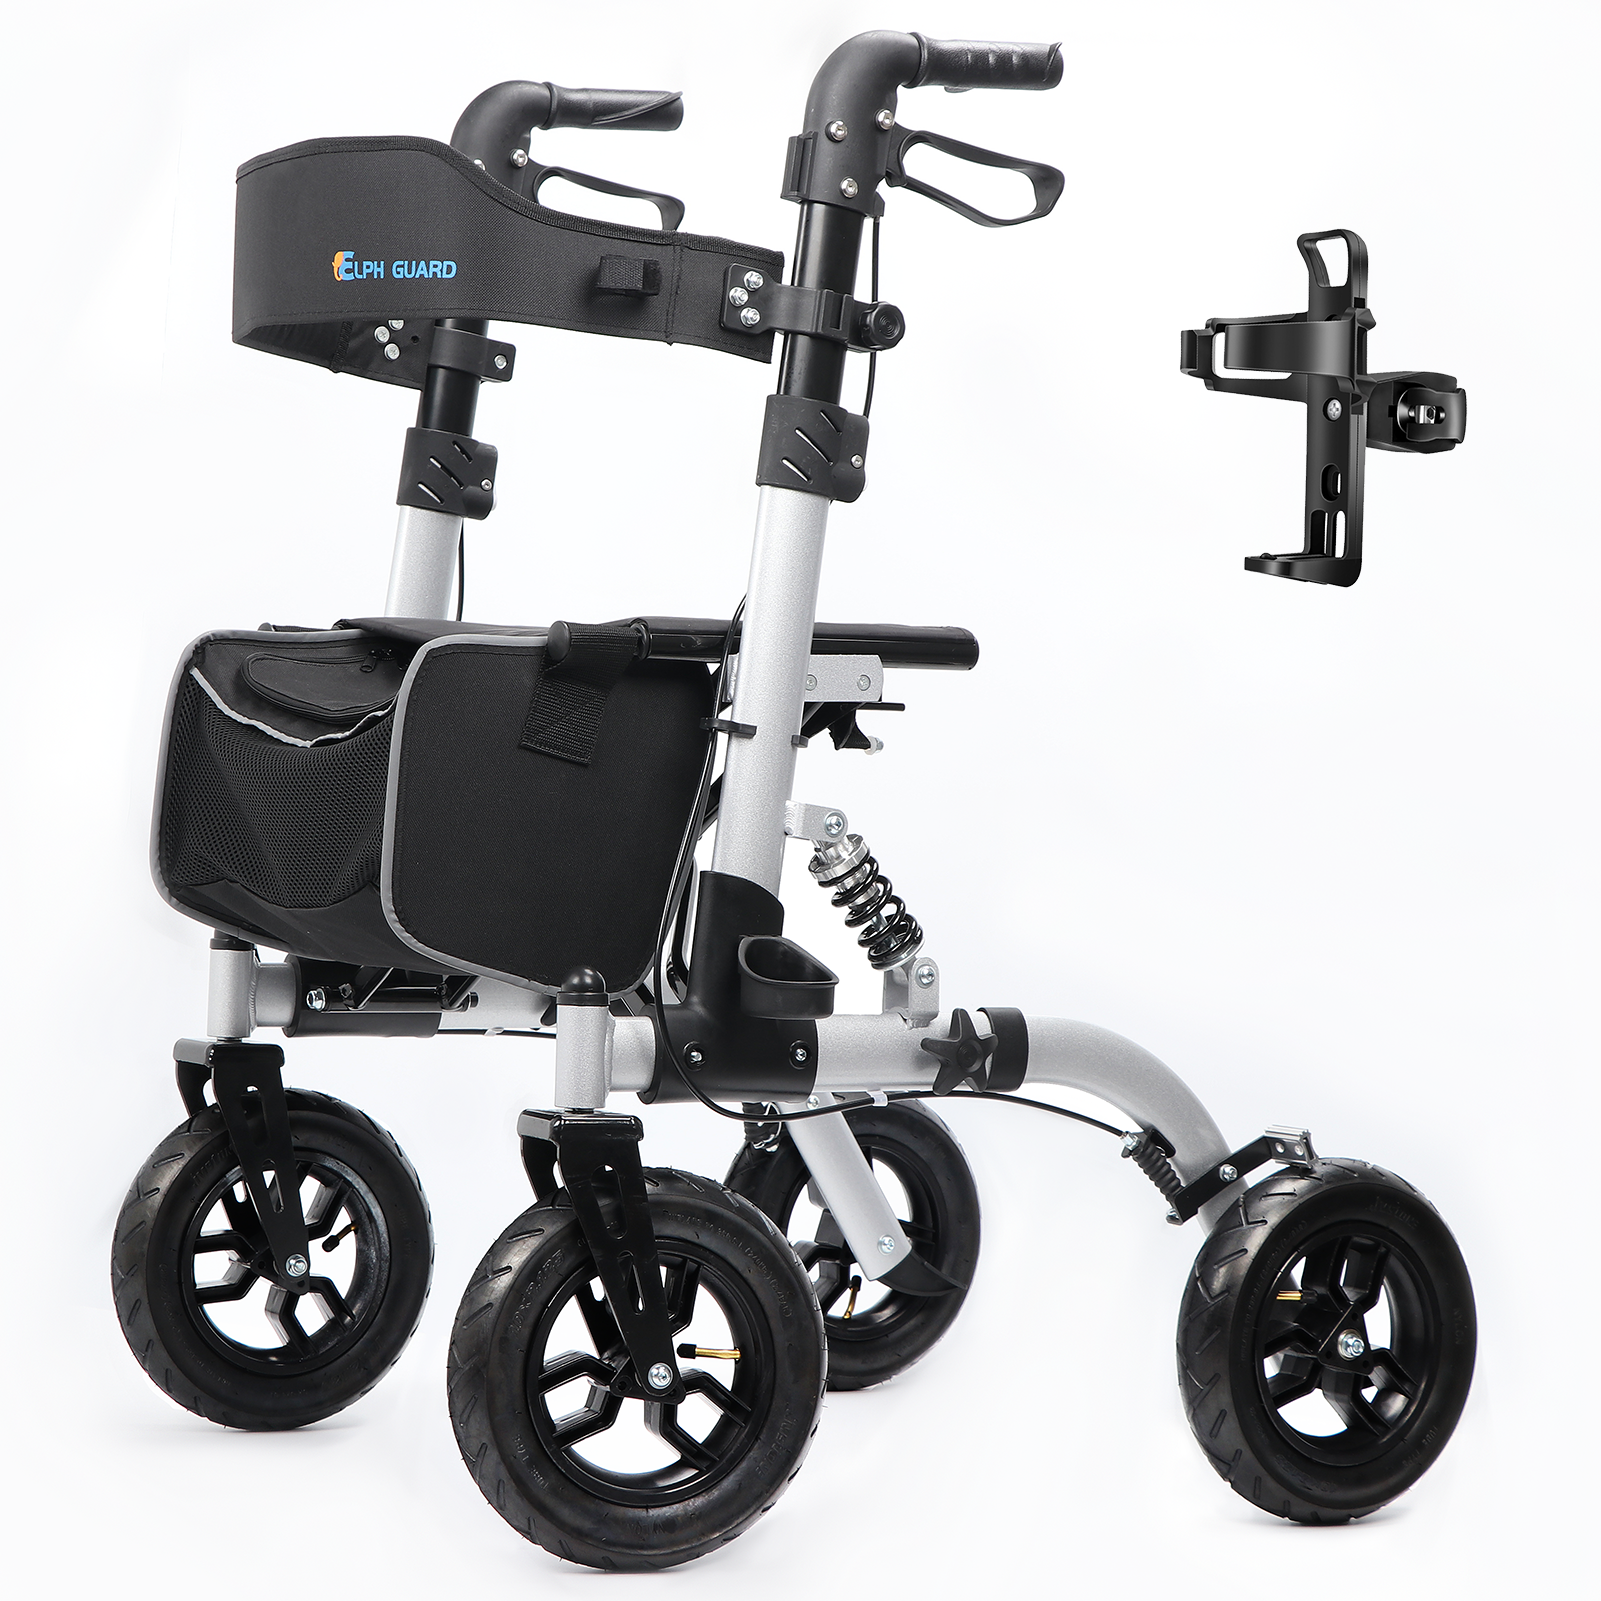 ELPH GUARD All Terrain Rollator with 10" Rubber Wheels, Support to 350 Pounds